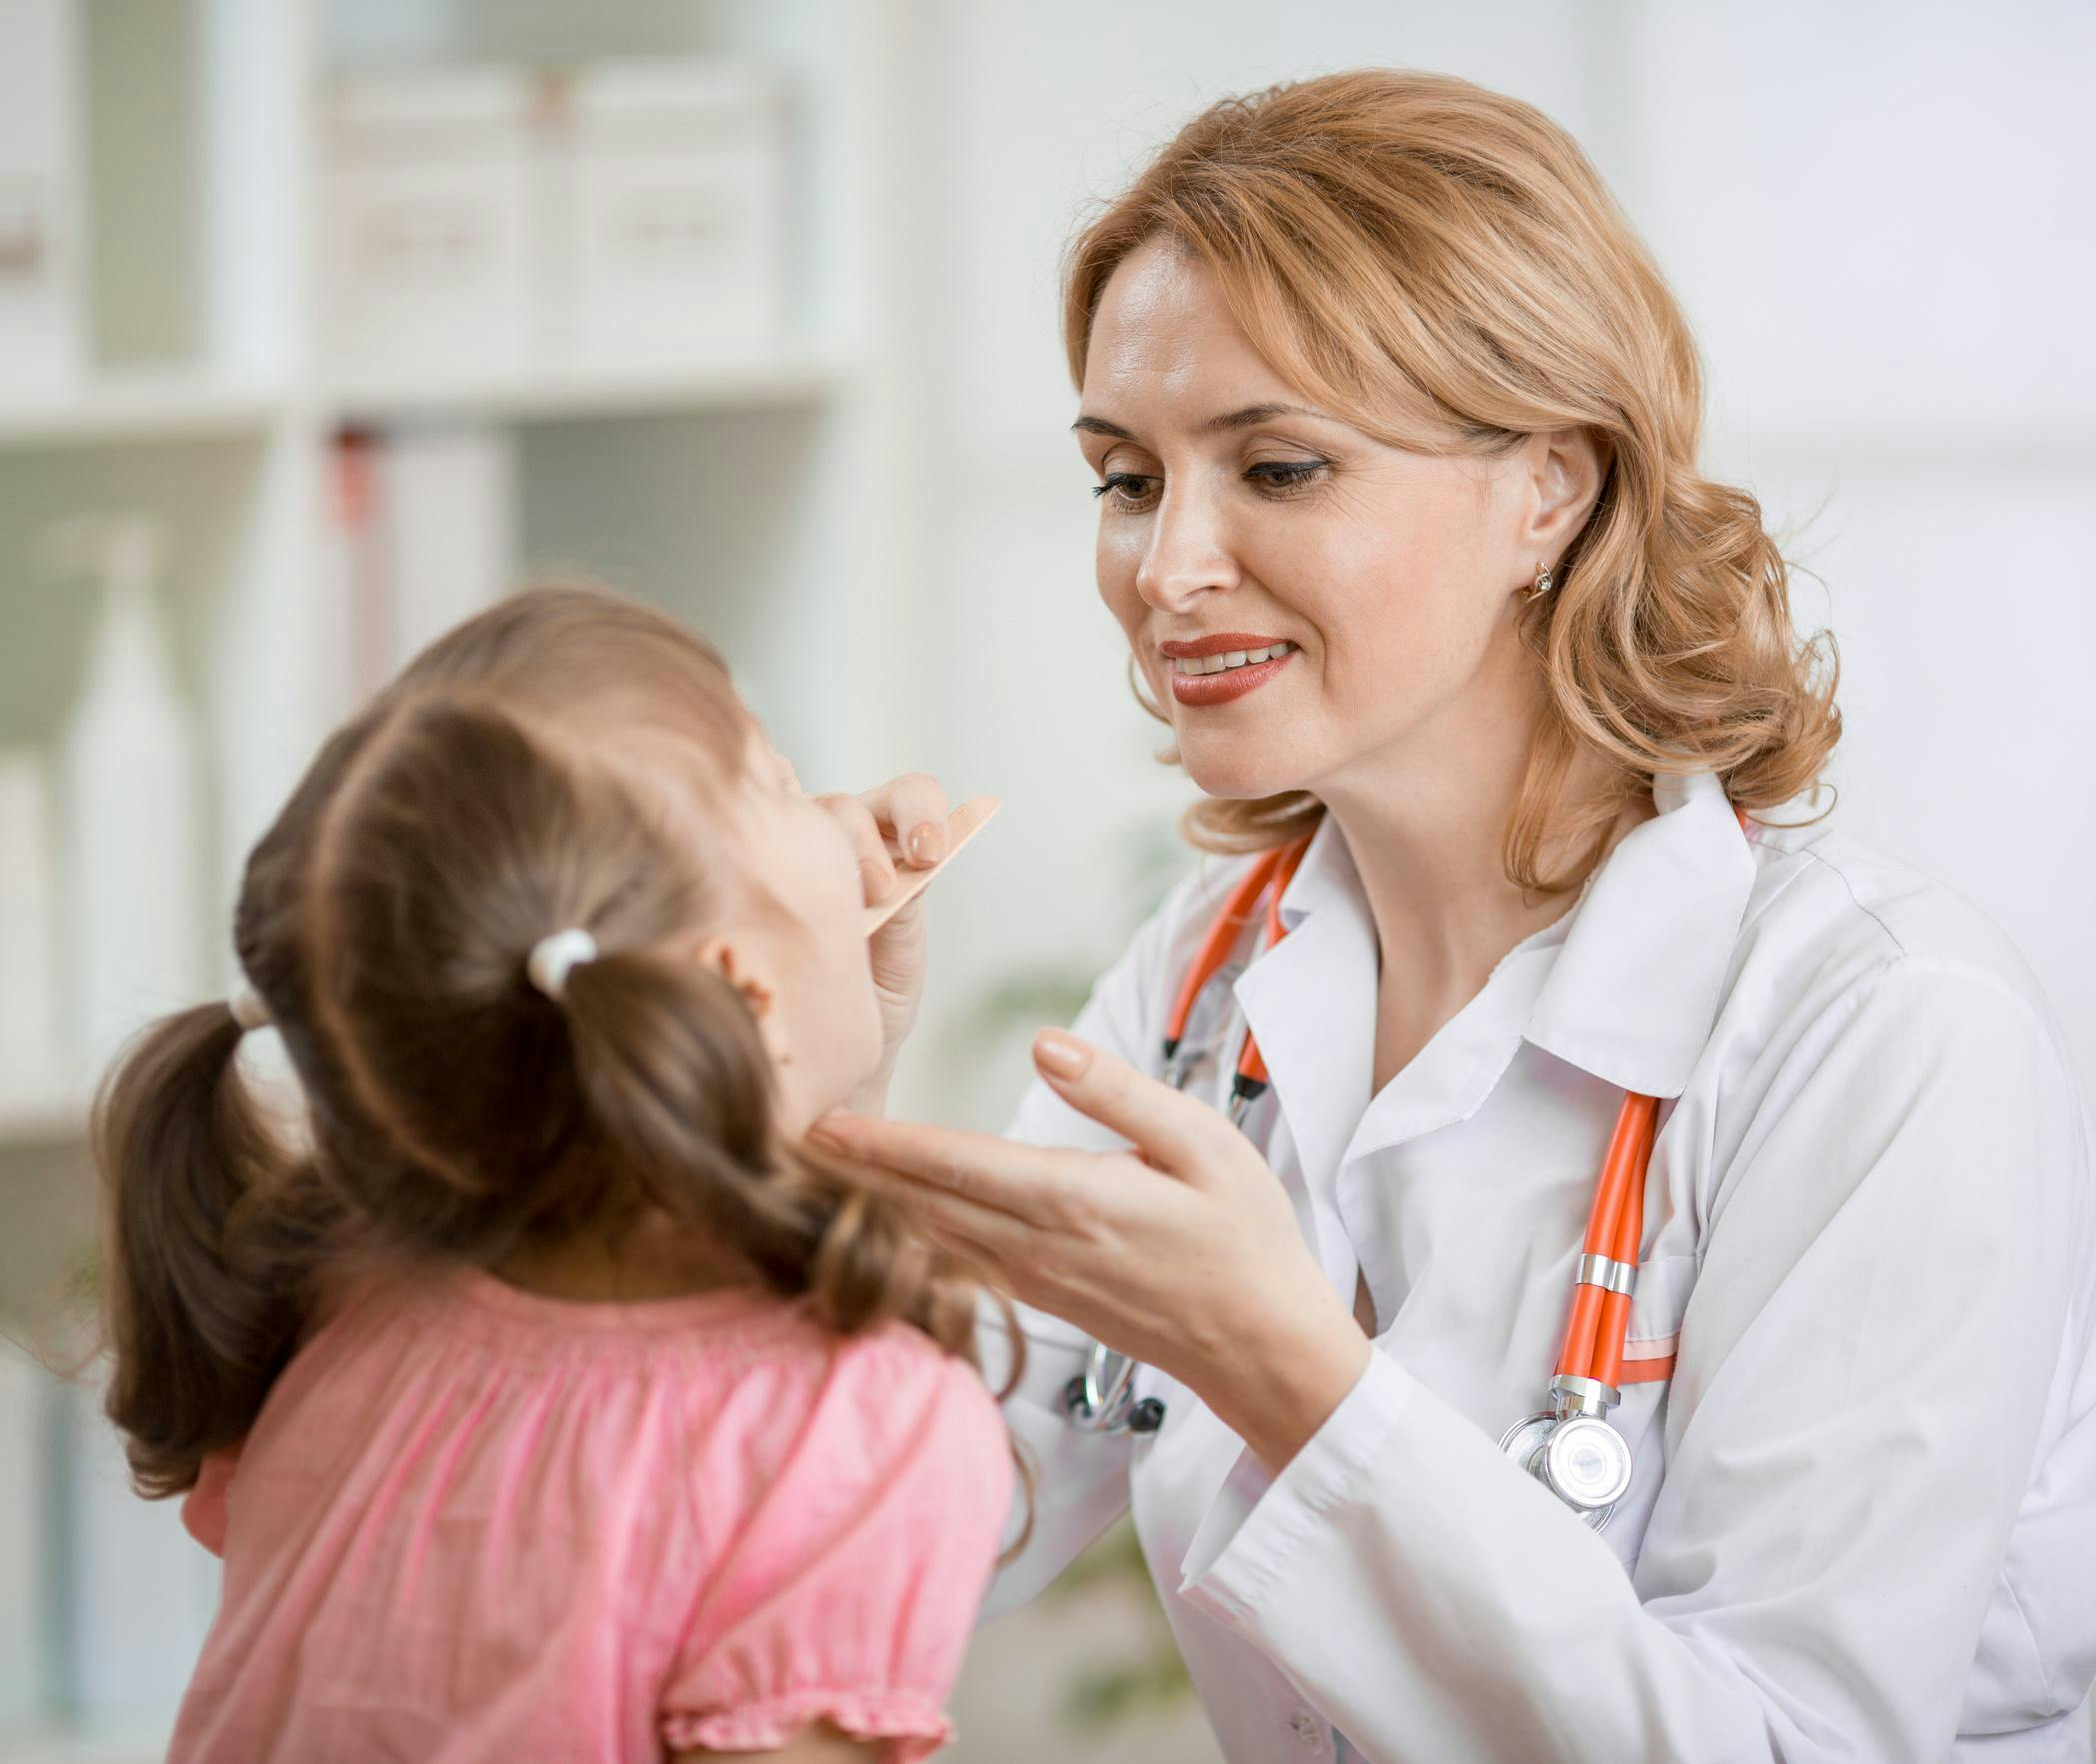 Pediatrician treating a patient.